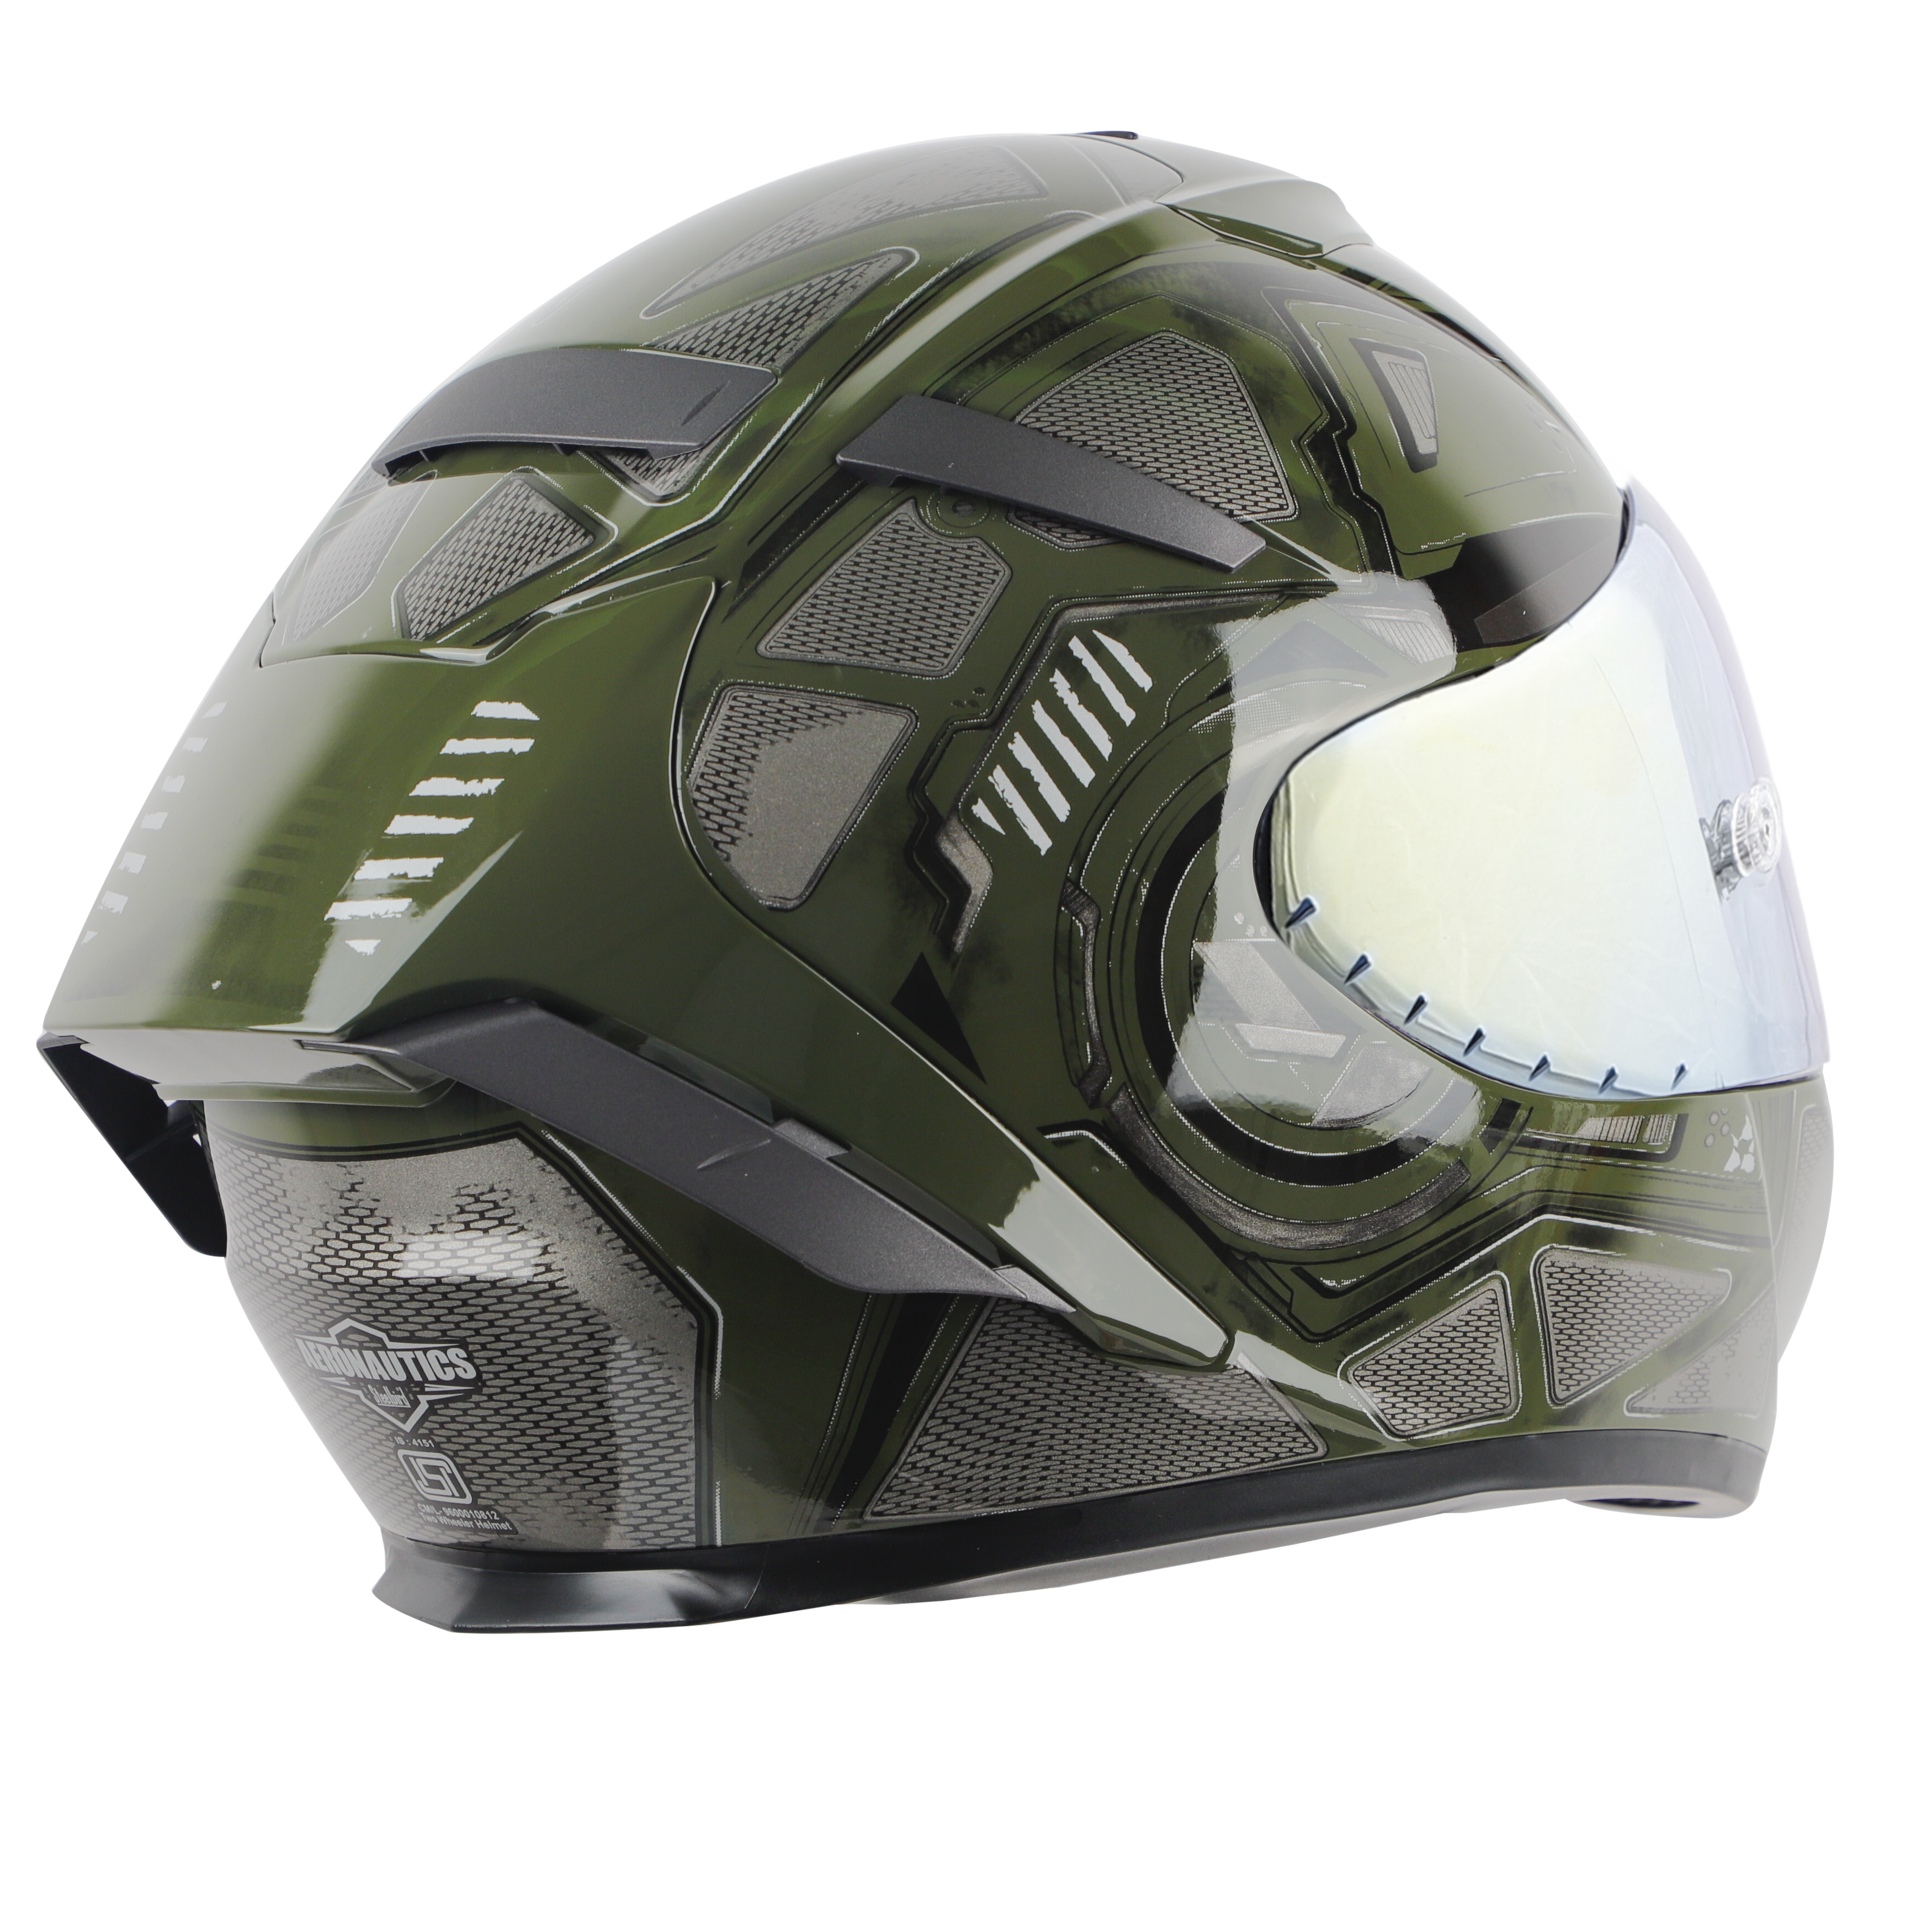 SA-2 GRILL GLOSSY BATTLE GREEN WITH GREY ( FITTED WITH CLEAR VISOR EXTRA GOLD CHROEM VISOR FREE &  WITH ANTI-FOG SHIELD HOLDER)